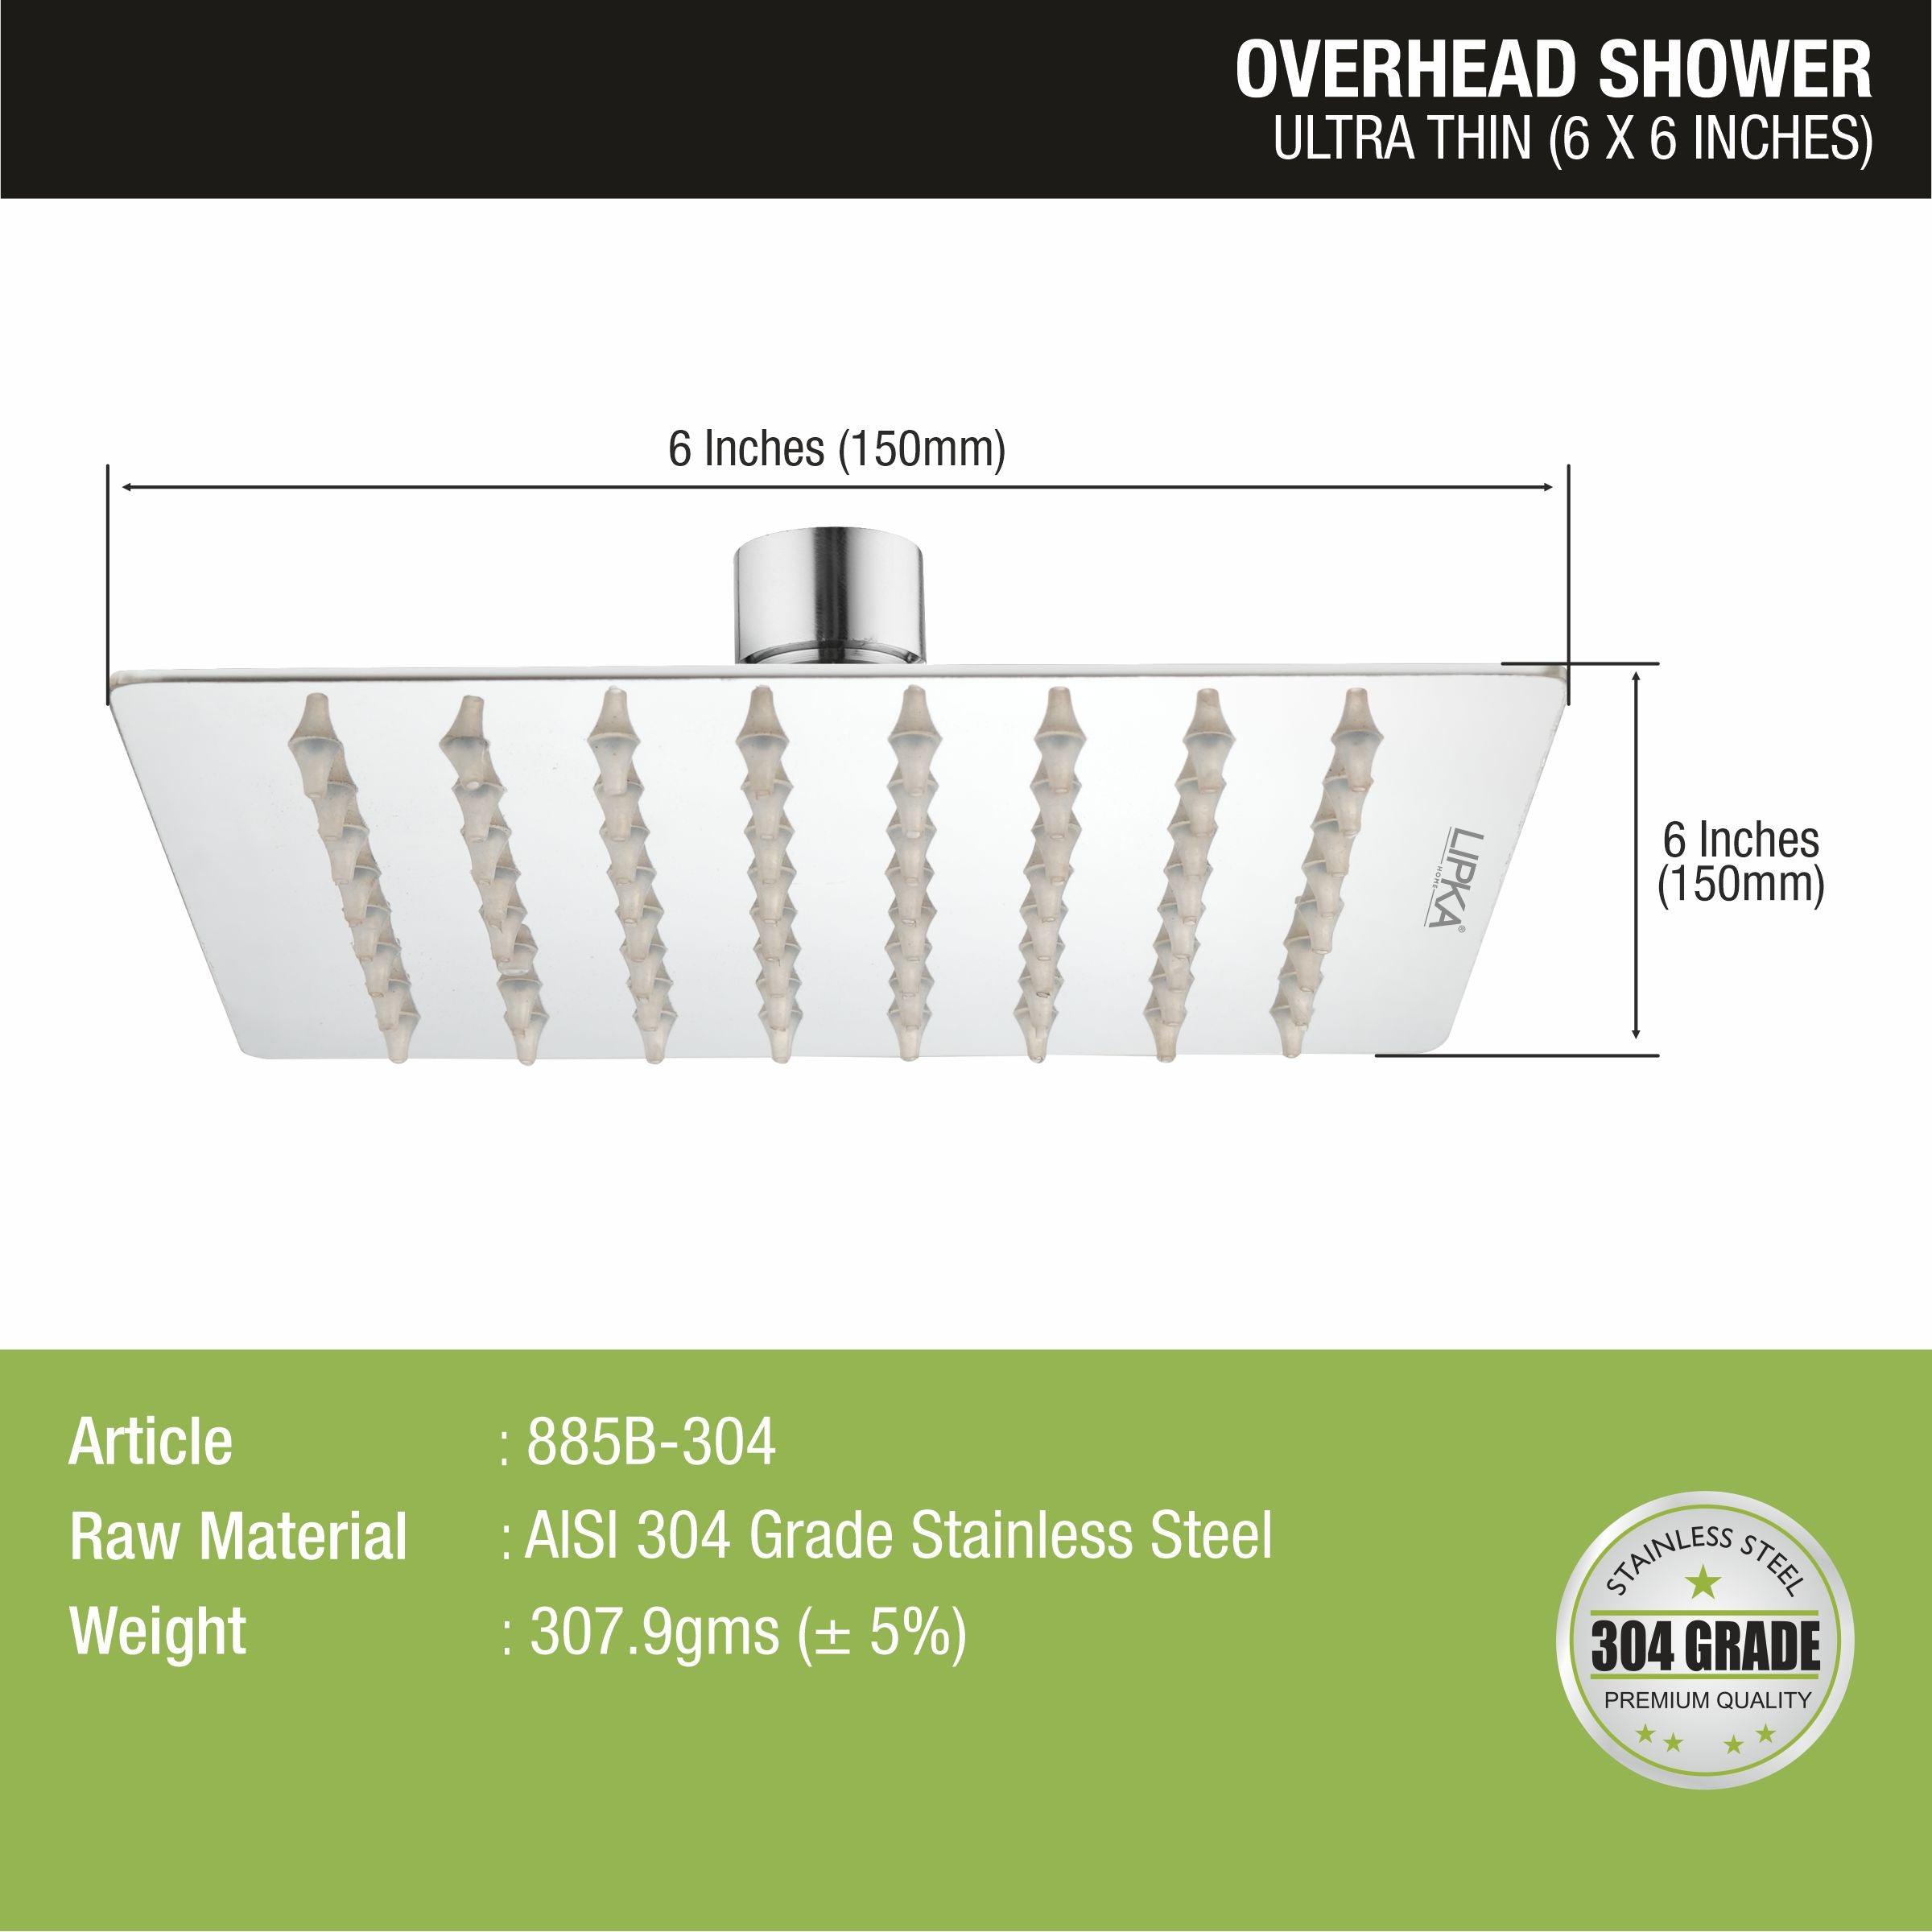 Ultra Thin 304-Grade Overhead Rain Shower (6 x 6 Inches) sizes and dimensions